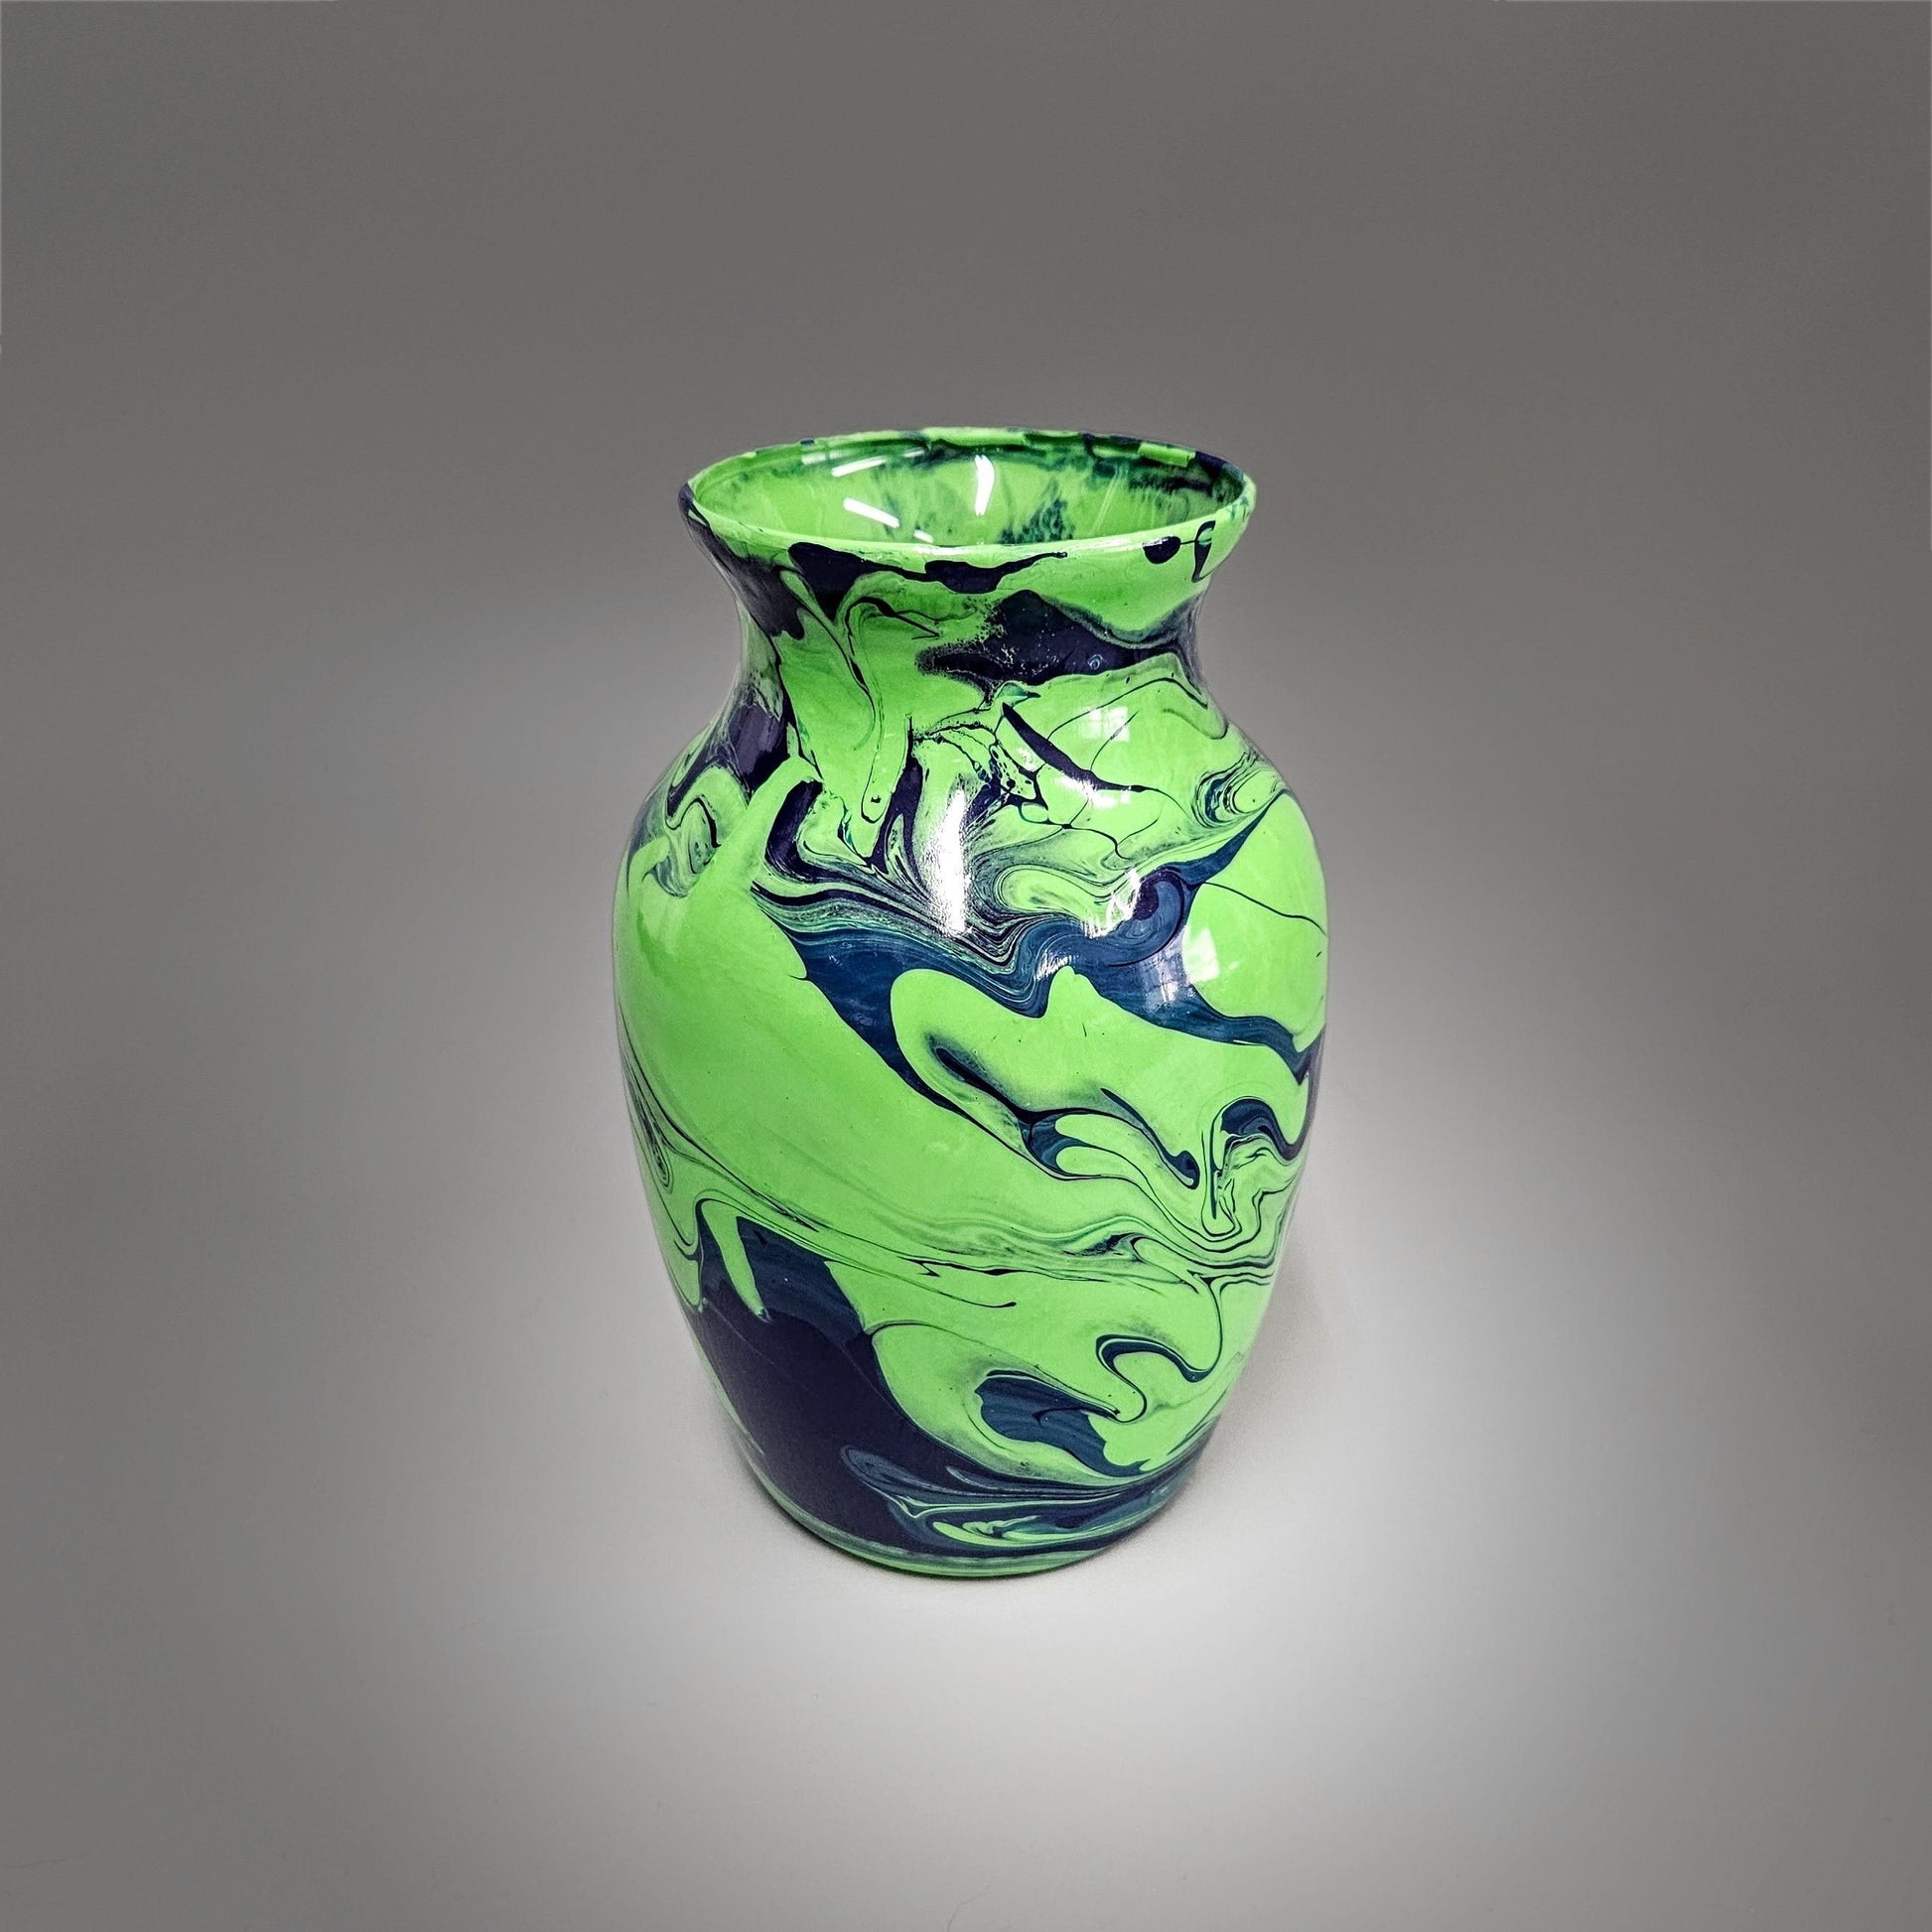 Painted Glass Vase in Spring Green and Navy Blue | Fluid Art Vase